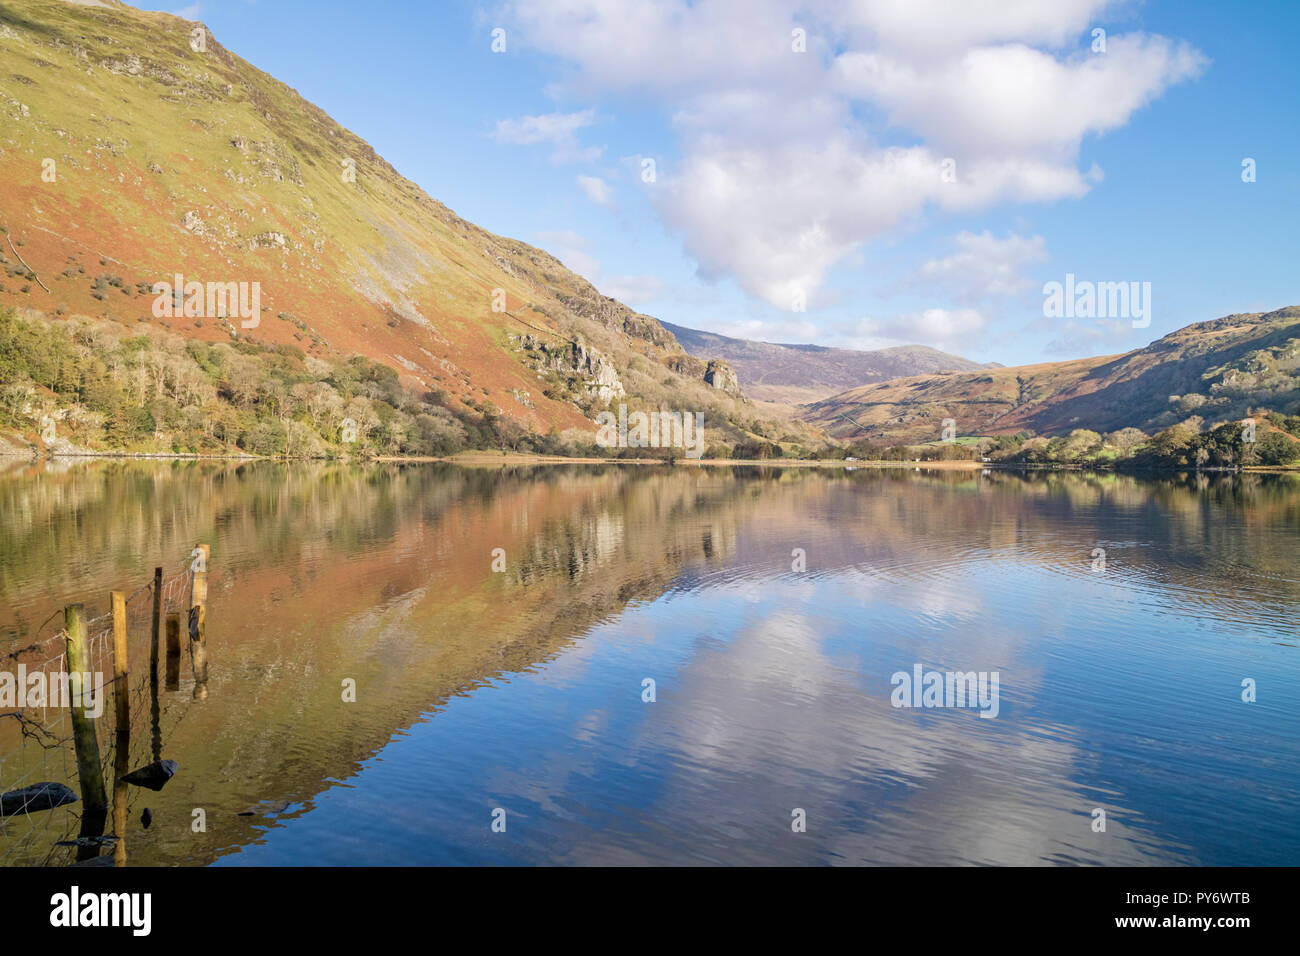 Autumn reflections on Llyn Gwynant in the Nant Gwynant Valley, Snowdonia National Park, North Wales, UK Stock Photo